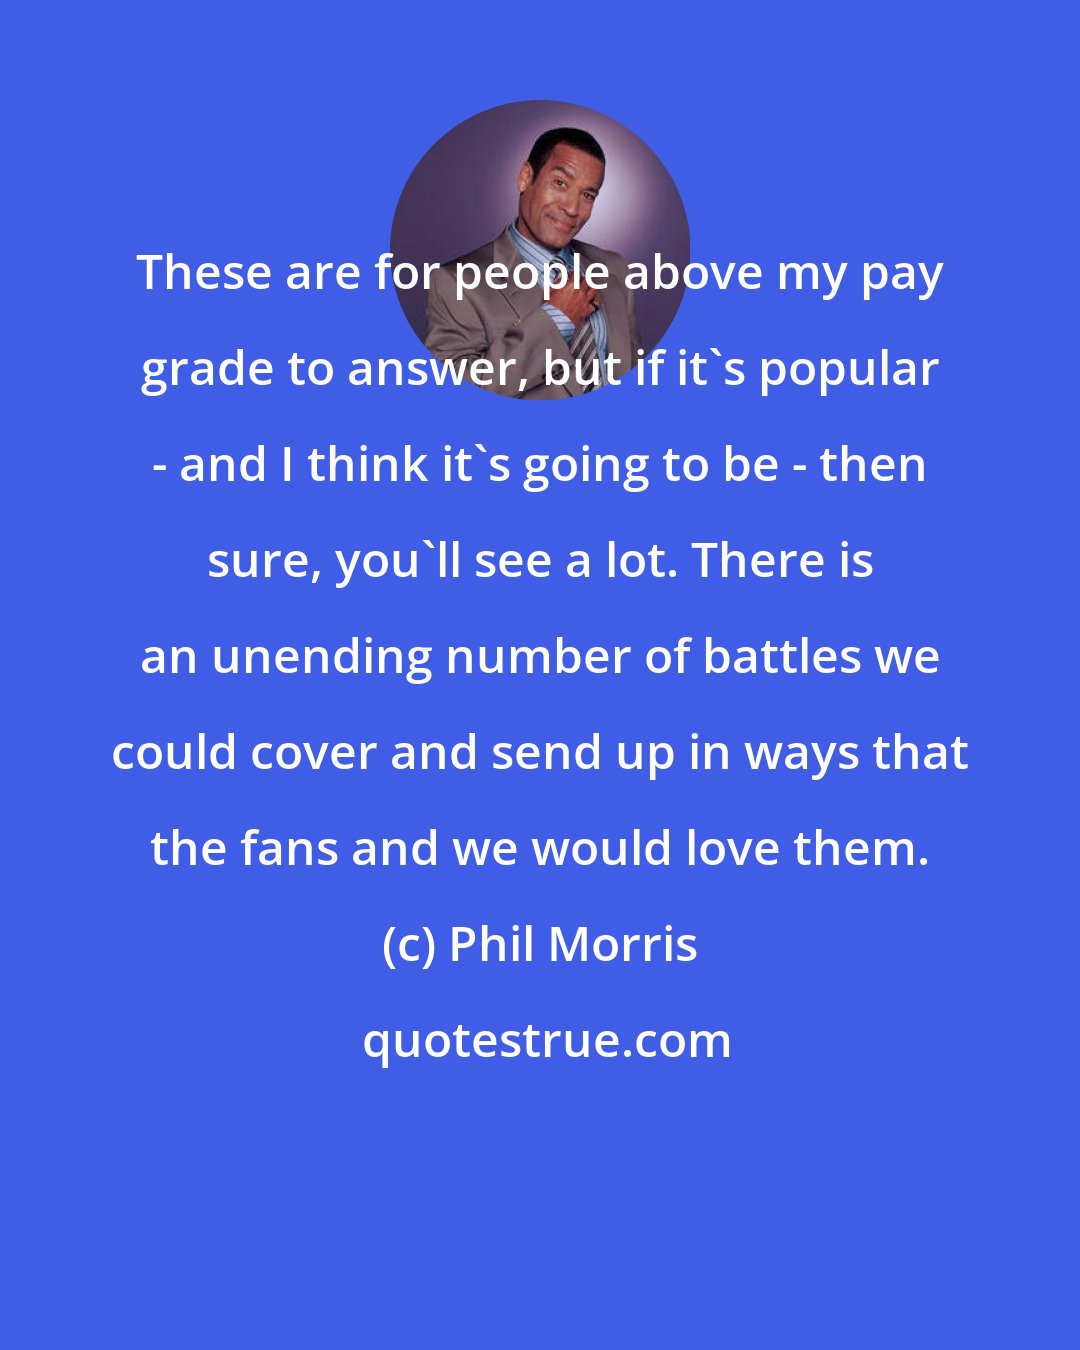 Phil Morris: These are for people above my pay grade to answer, but if it's popular - and I think it's going to be - then sure, you'll see a lot. There is an unending number of battles we could cover and send up in ways that the fans and we would love them.